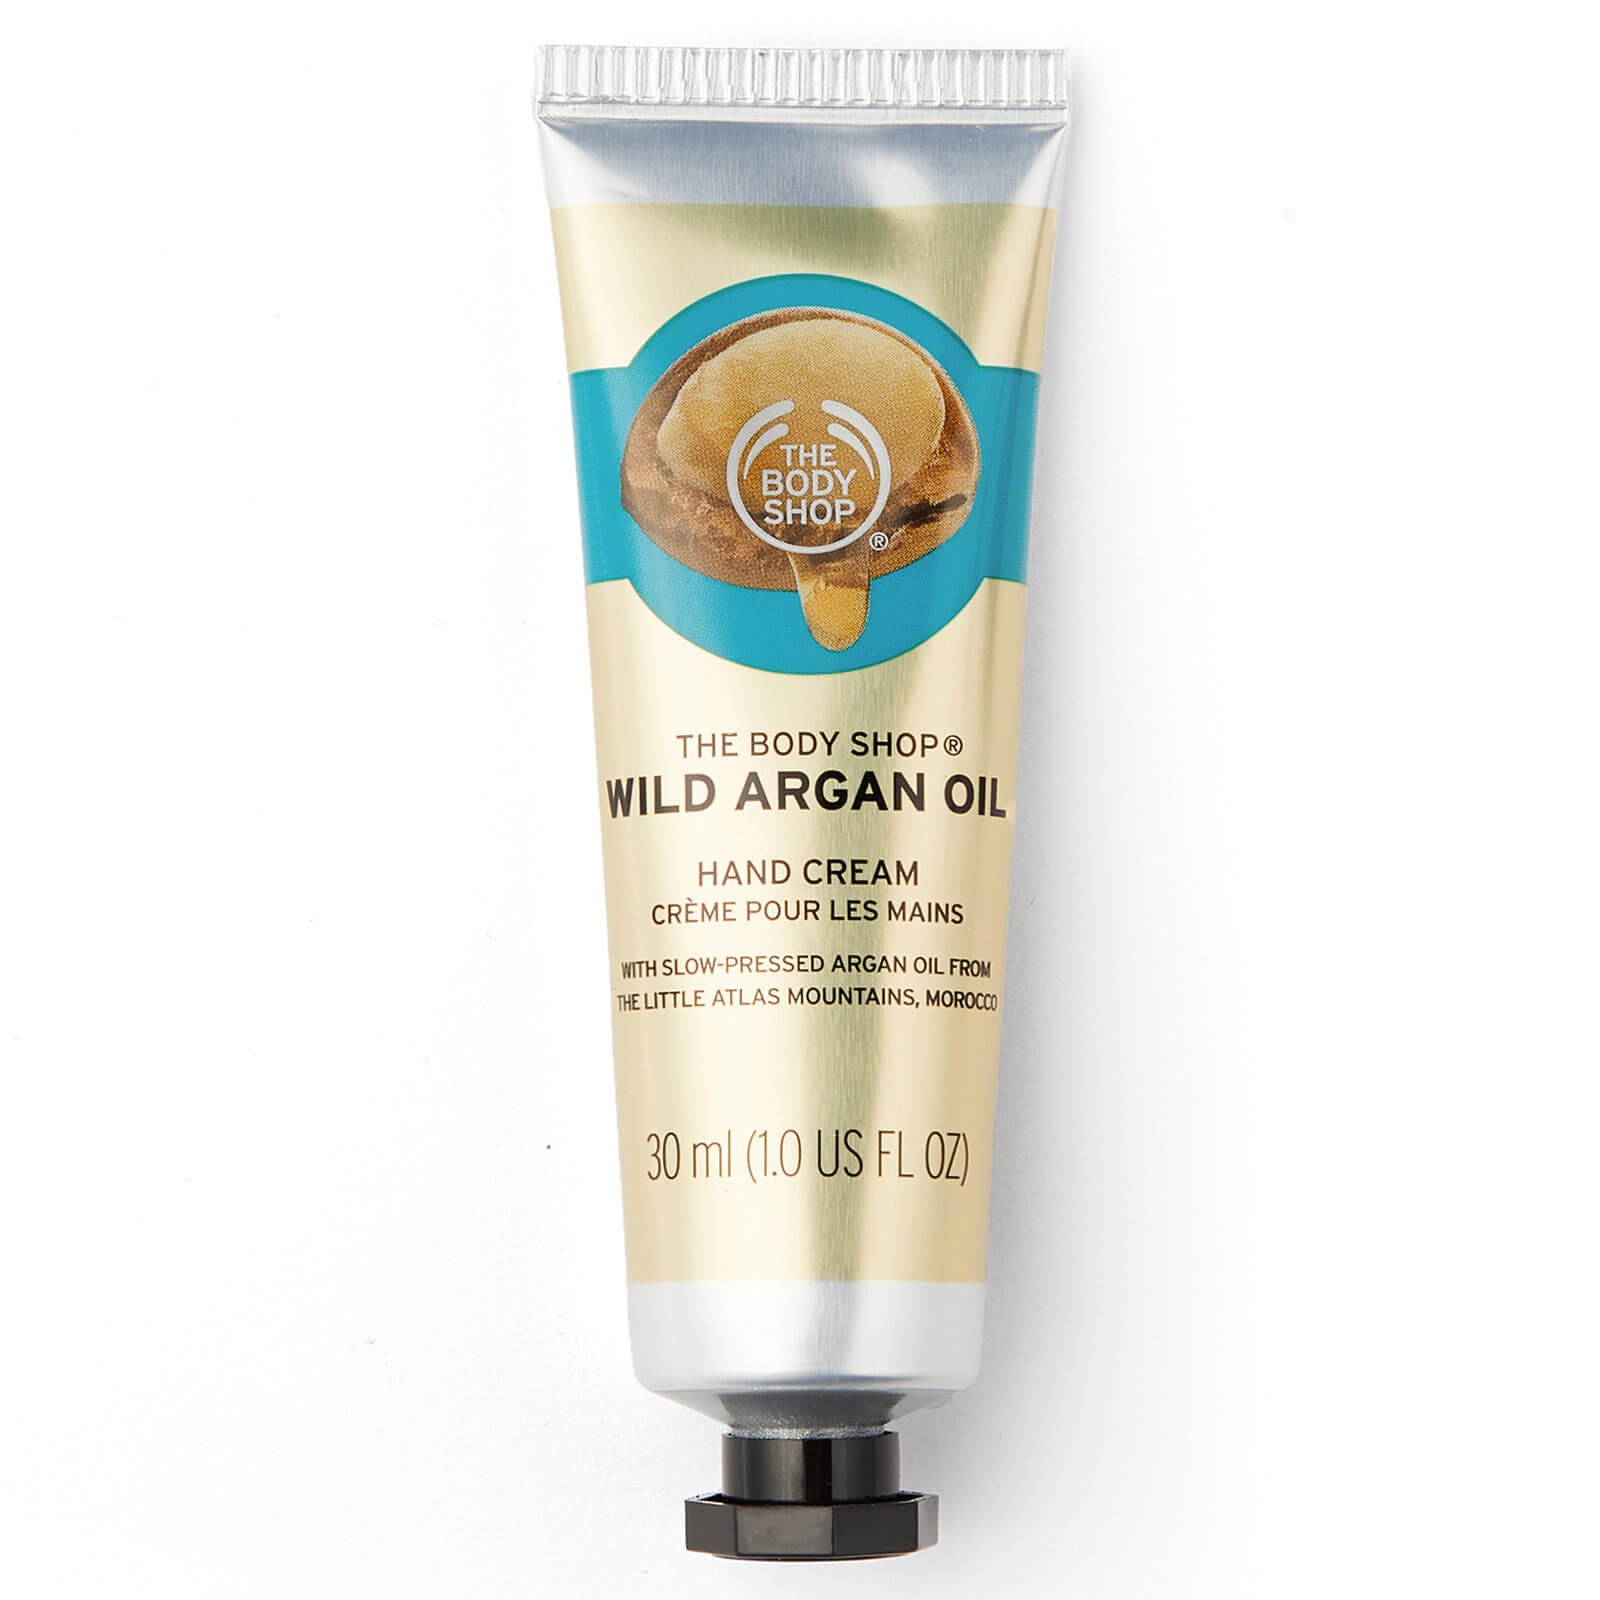 Shop The Body Shop Hand Cream on DailyMail